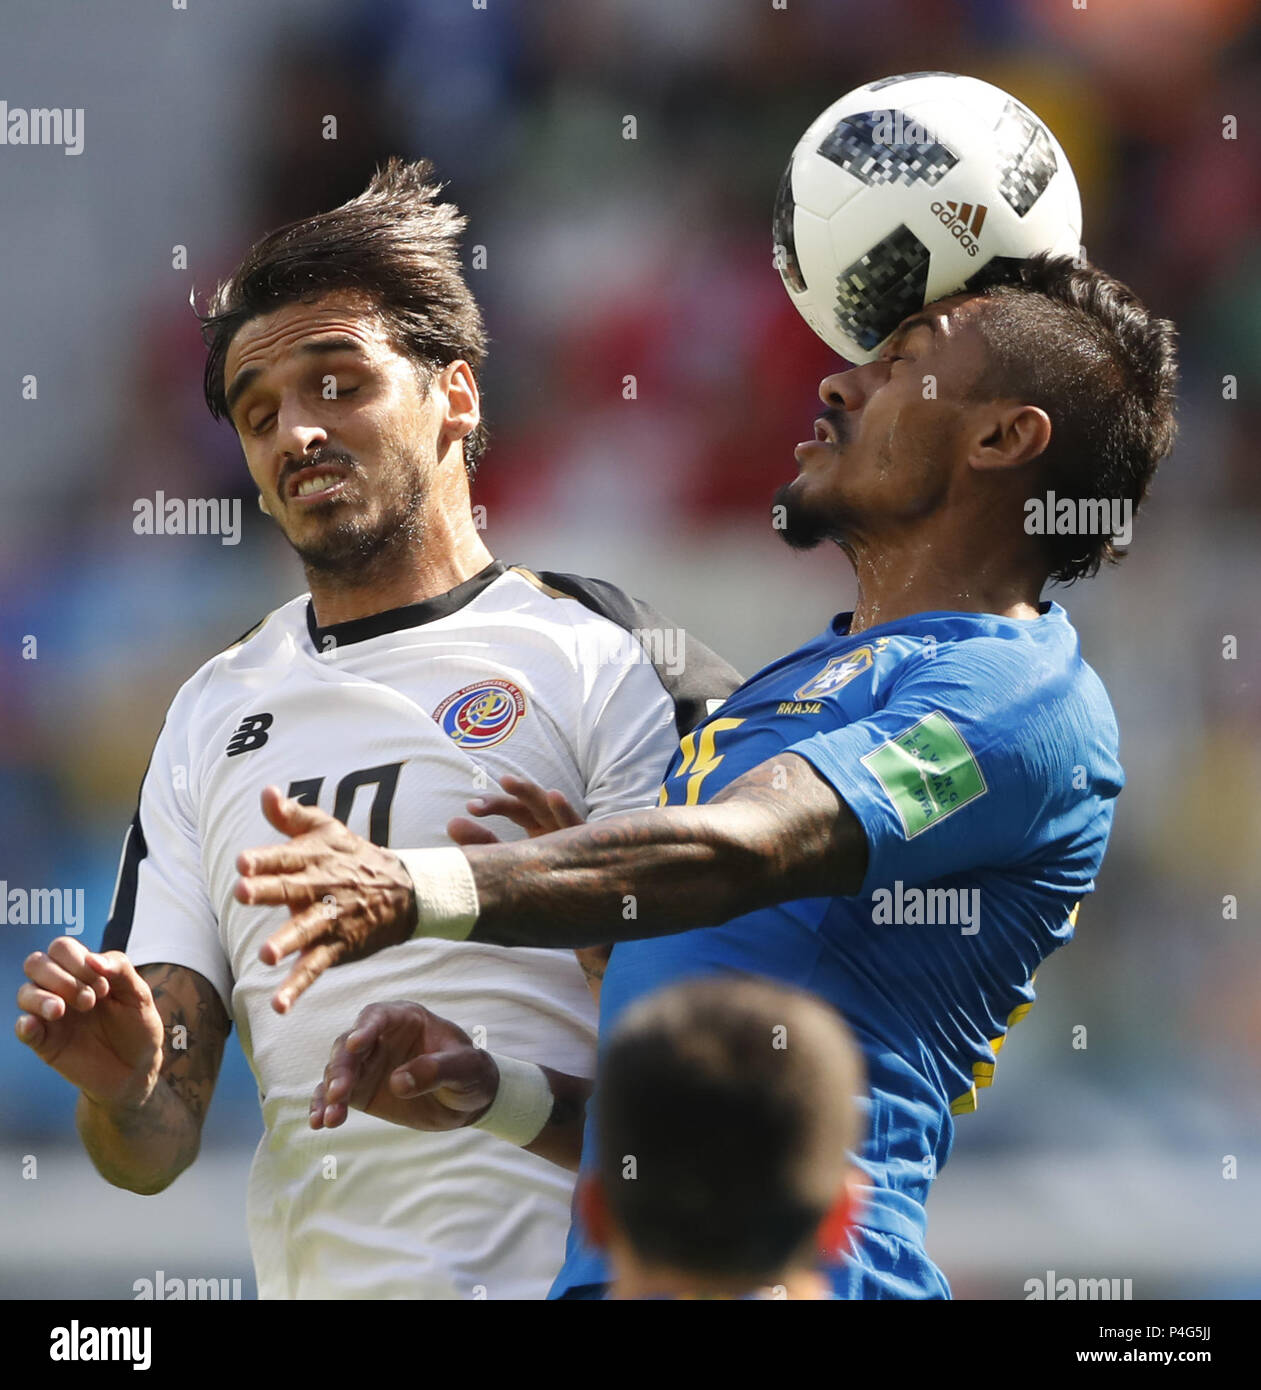 Saint Petersburg, Russia. 22nd June, 2018. Paulinho (R) of Brazil vies with Bryan Ruiz of Costa Rica during the 2018 FIFA World Cup Group E match between Brazil and Costa Rica in Saint Petersburg, Russia, June 22, 2018. Credit: Cao Can/Xinhua/Alamy Live News Stock Photo